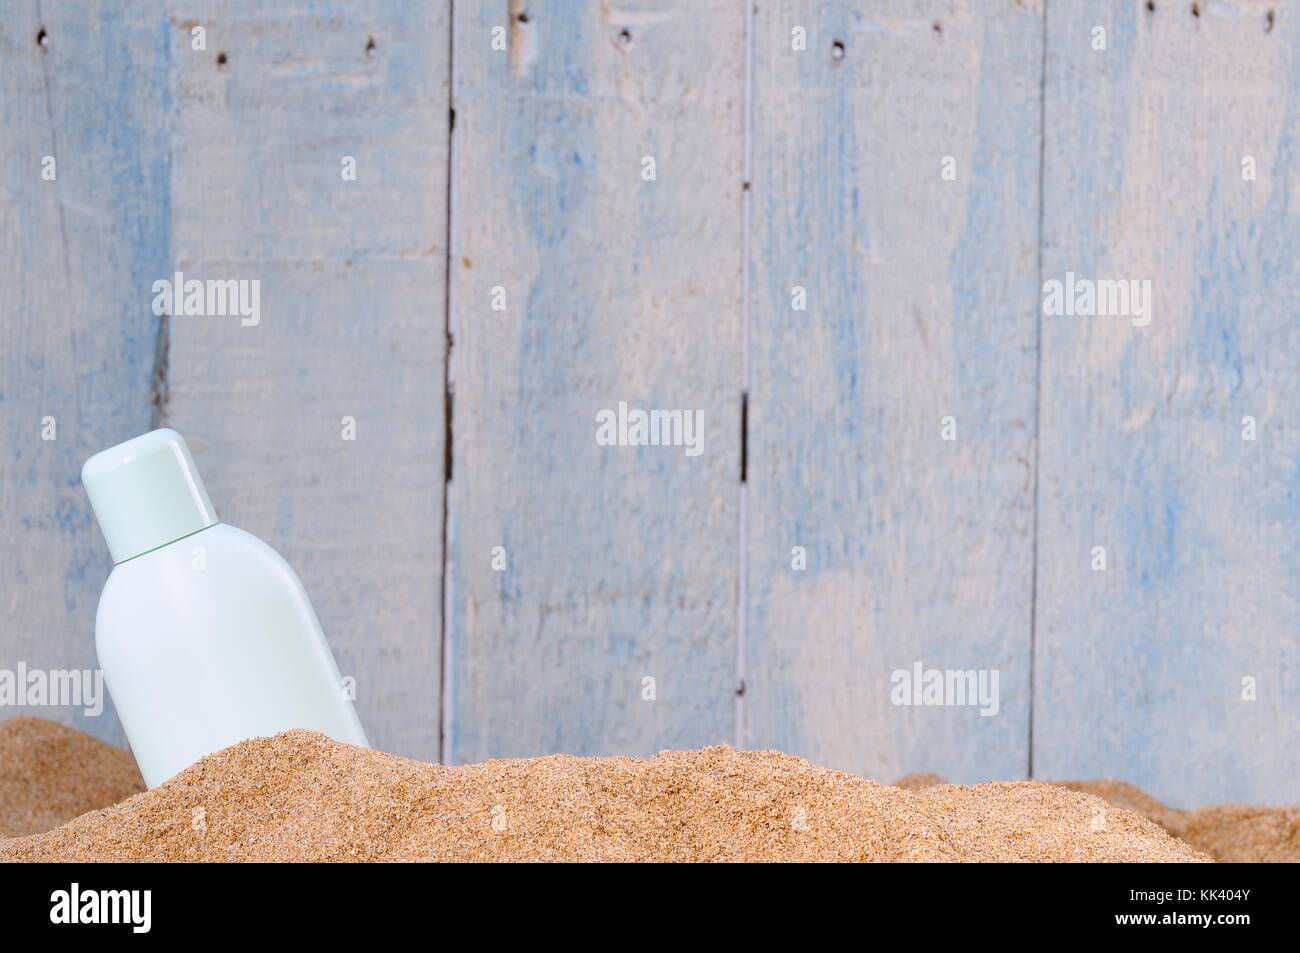 Bottle in sand against of blue wooden wall Stock Photo